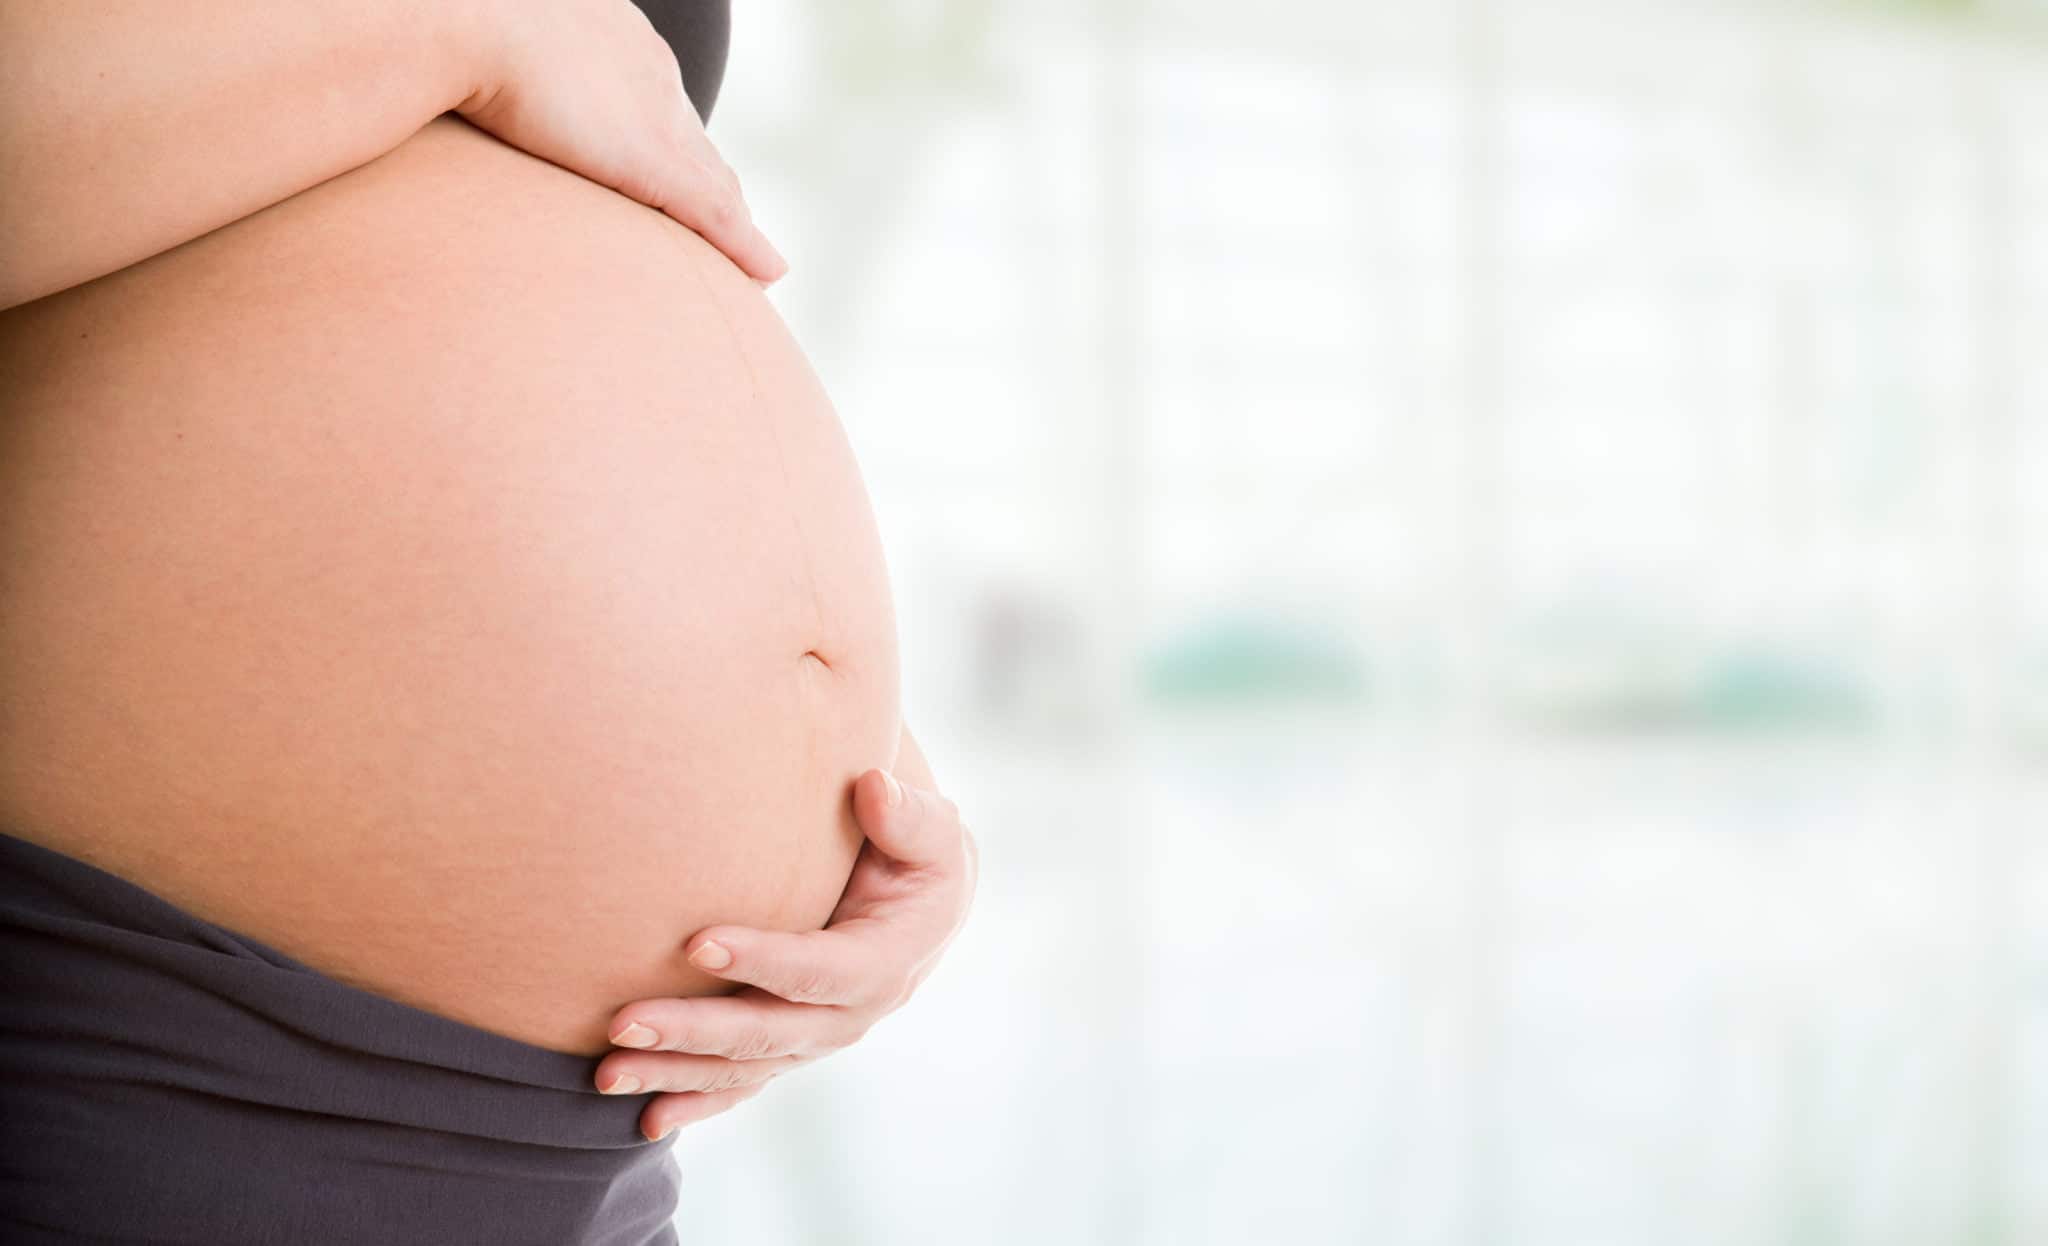 Physiotherapy in Pregnancy: What to expect when you’re expecting…